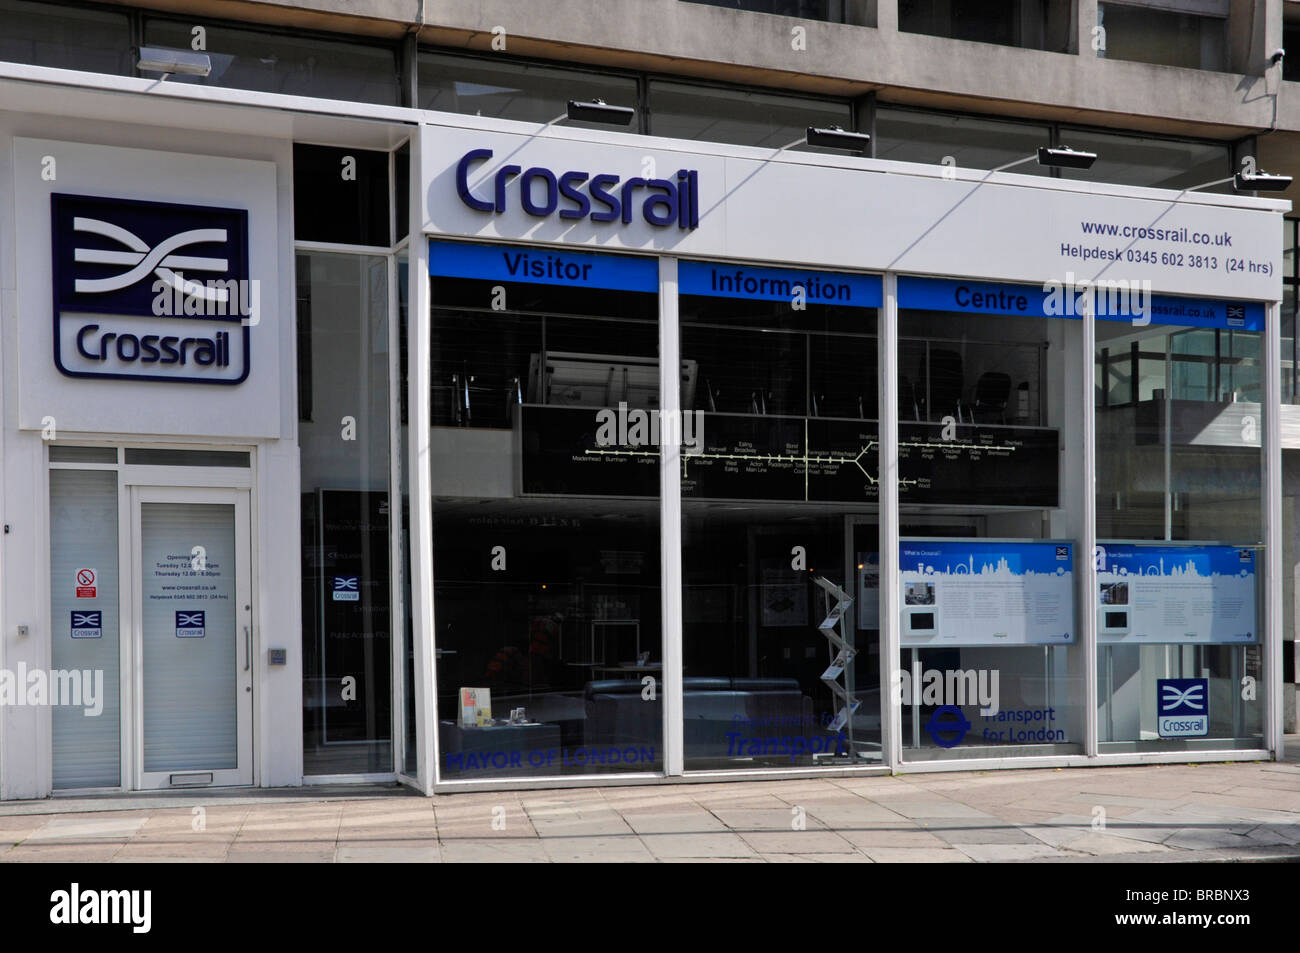 Crossrail development visitor information centre aiming to update public about public transport routes trains & new infrastructure London England UK Stock Photo